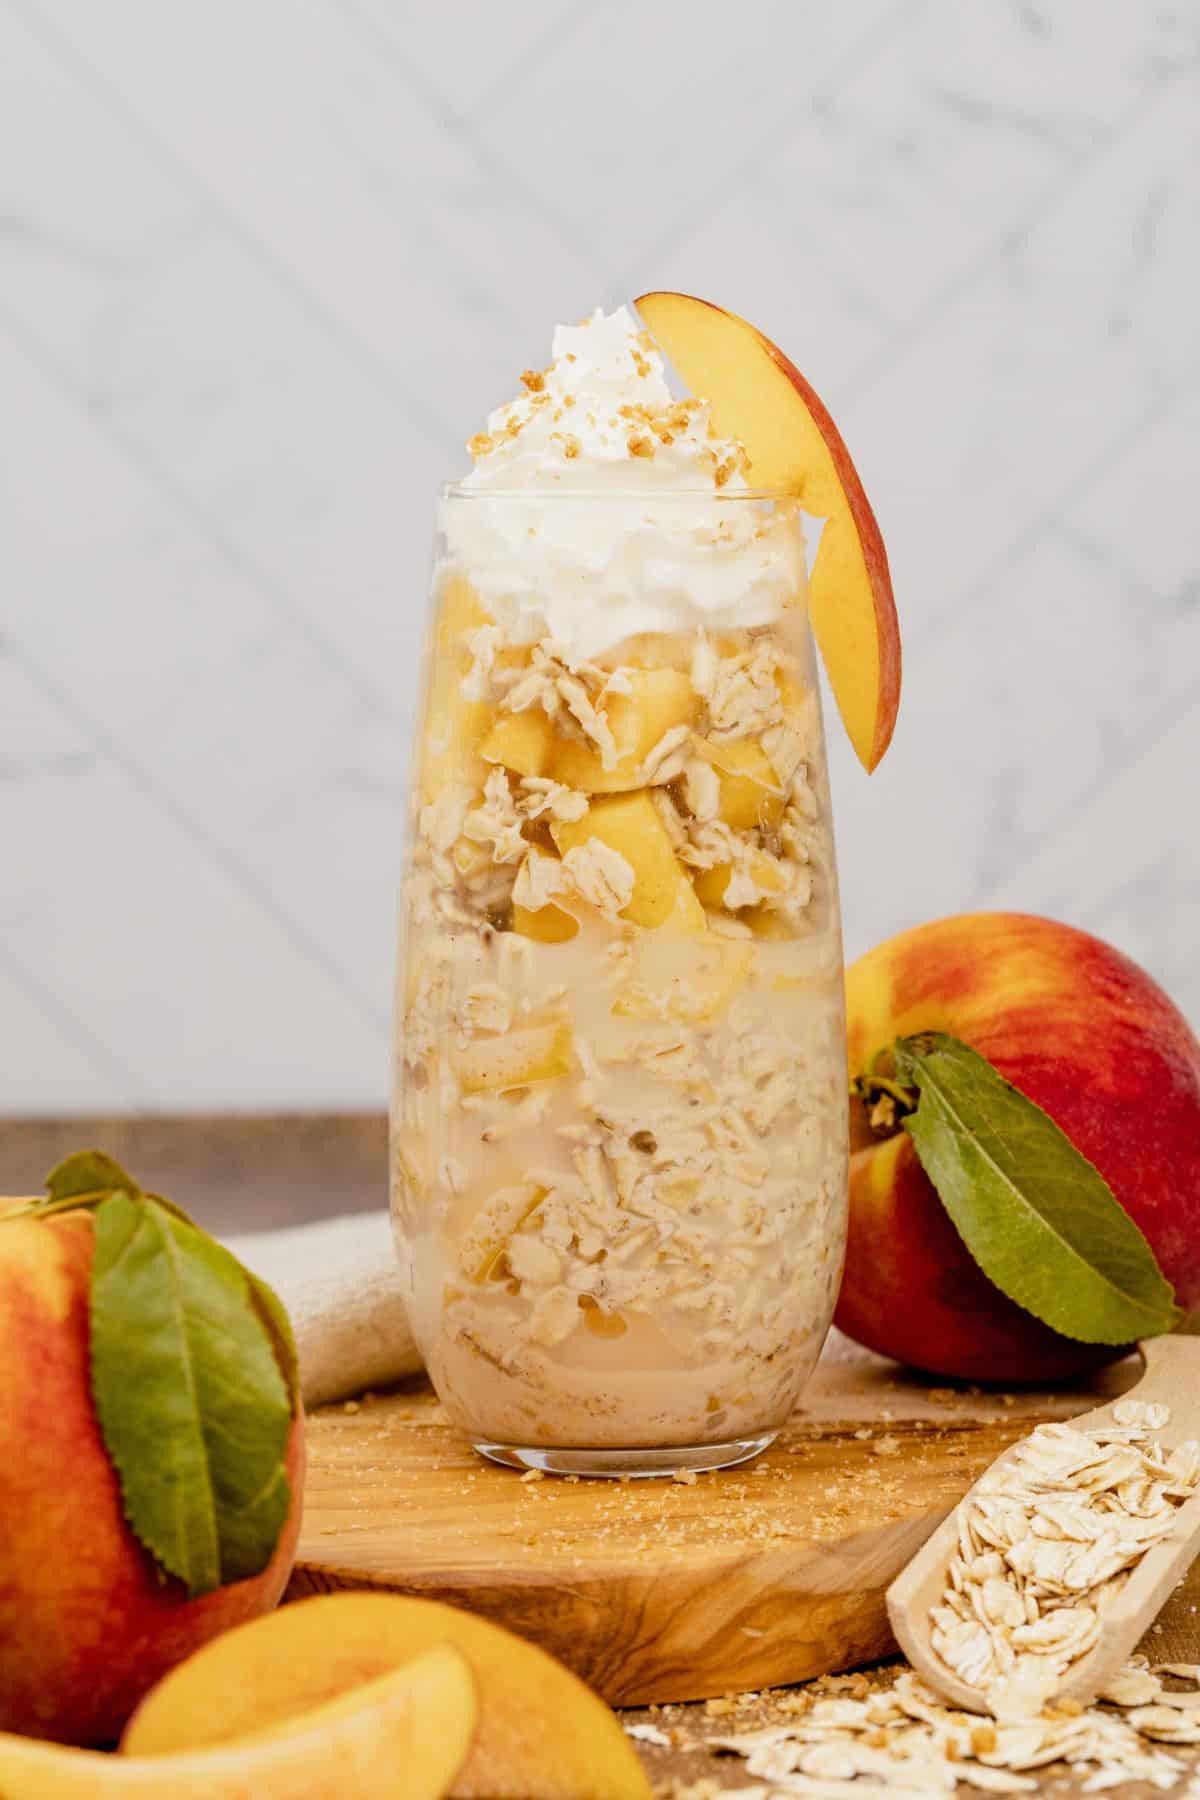 peach overnight oats in a glass cup with whip cream and a slice of peach on the side. More peaches surround the cup and a spoonful of oats can be seen.